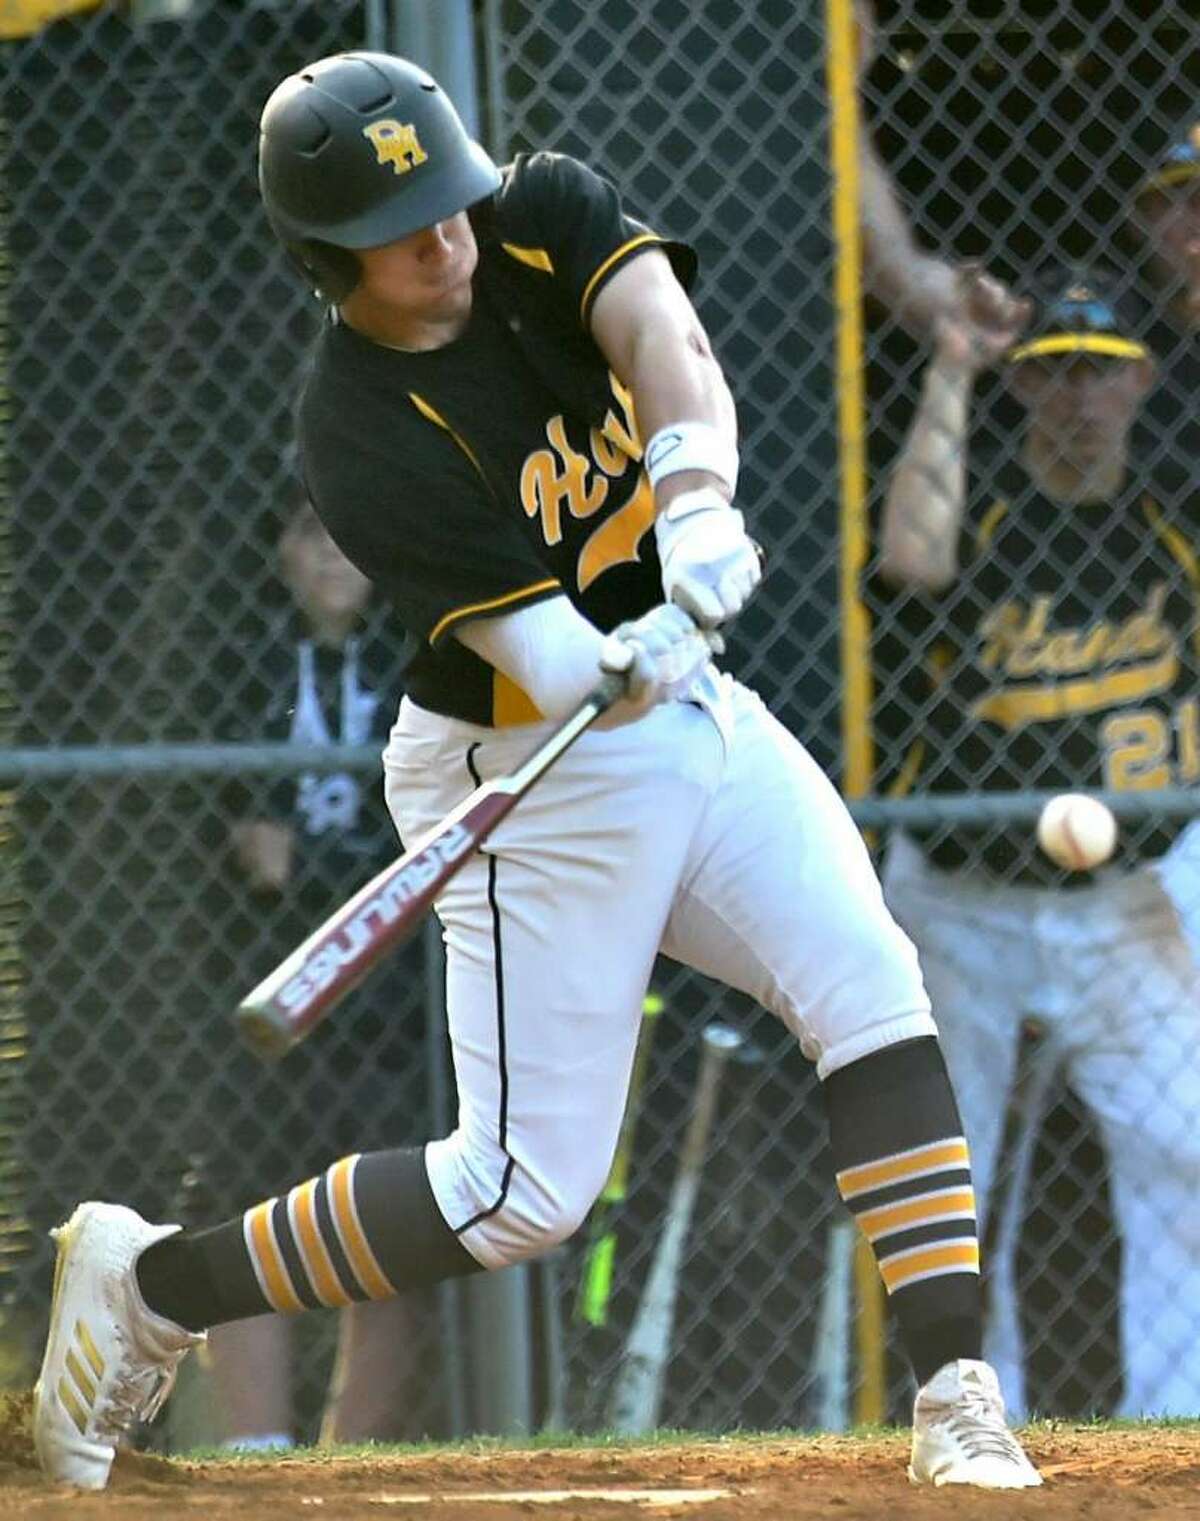 Woodbridge, Connecticut -Monday, May 5, 2018: Ed Sweeney of Daniel Hand H.S. takes a swing during seventh inning baseball Monday at Amity H.S. Amity H.S. defeated Hand H.S. 4-3. (Photo: Peter Hvizdak / Hearst Connecticut Media)